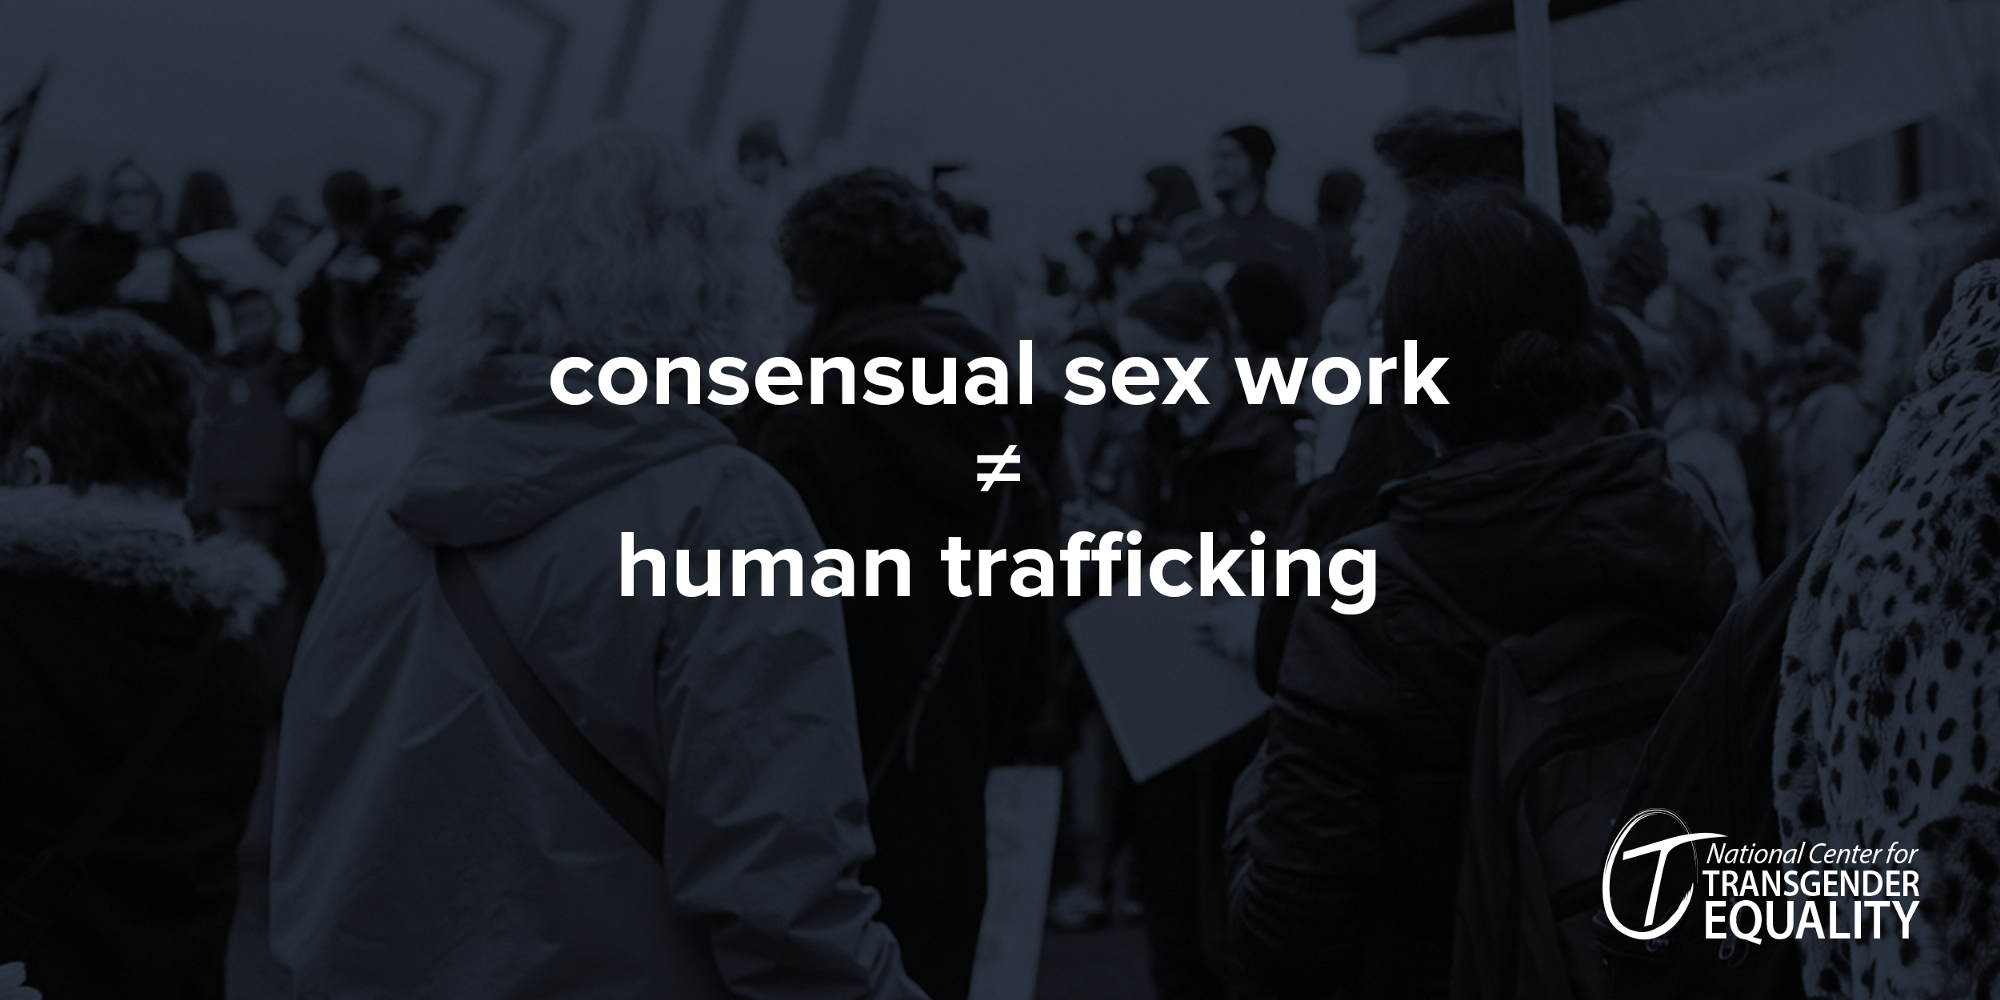 A blurry monochrome background showing a protest, over which is text reading "consensual sex work is not equal to human trafficking."